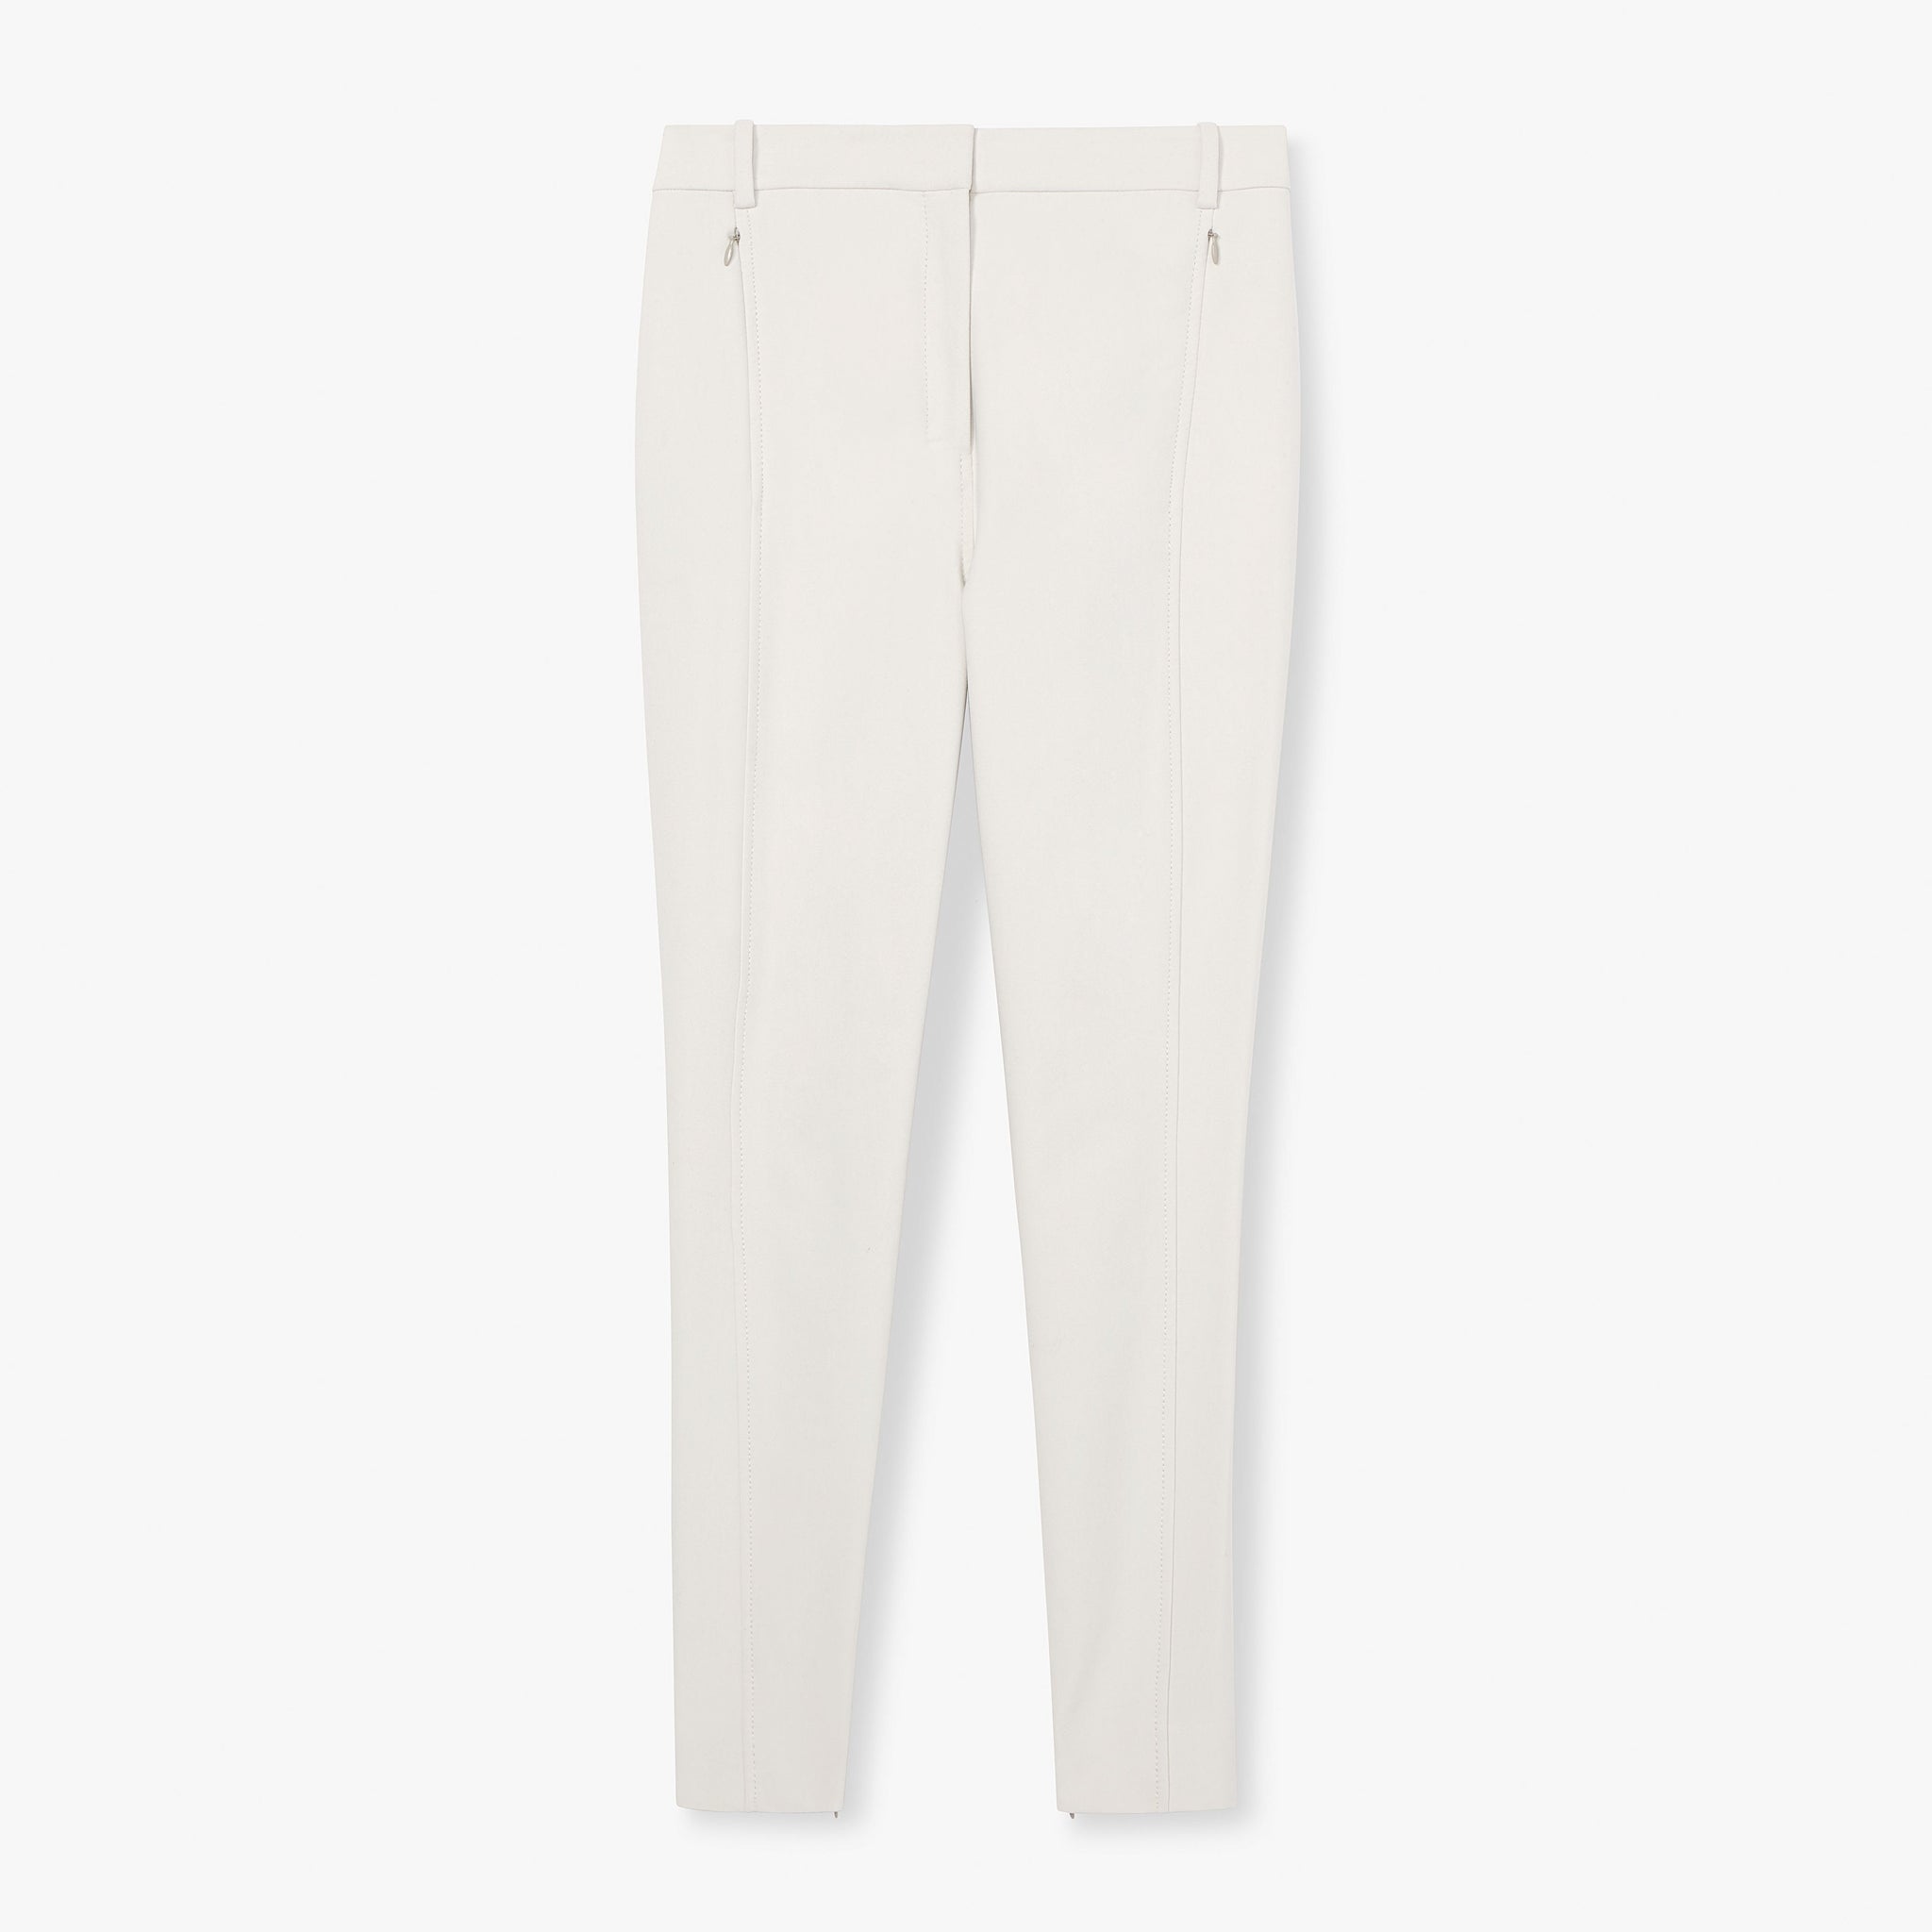 packshot image of the Curie Pant—Everstretch in Bone